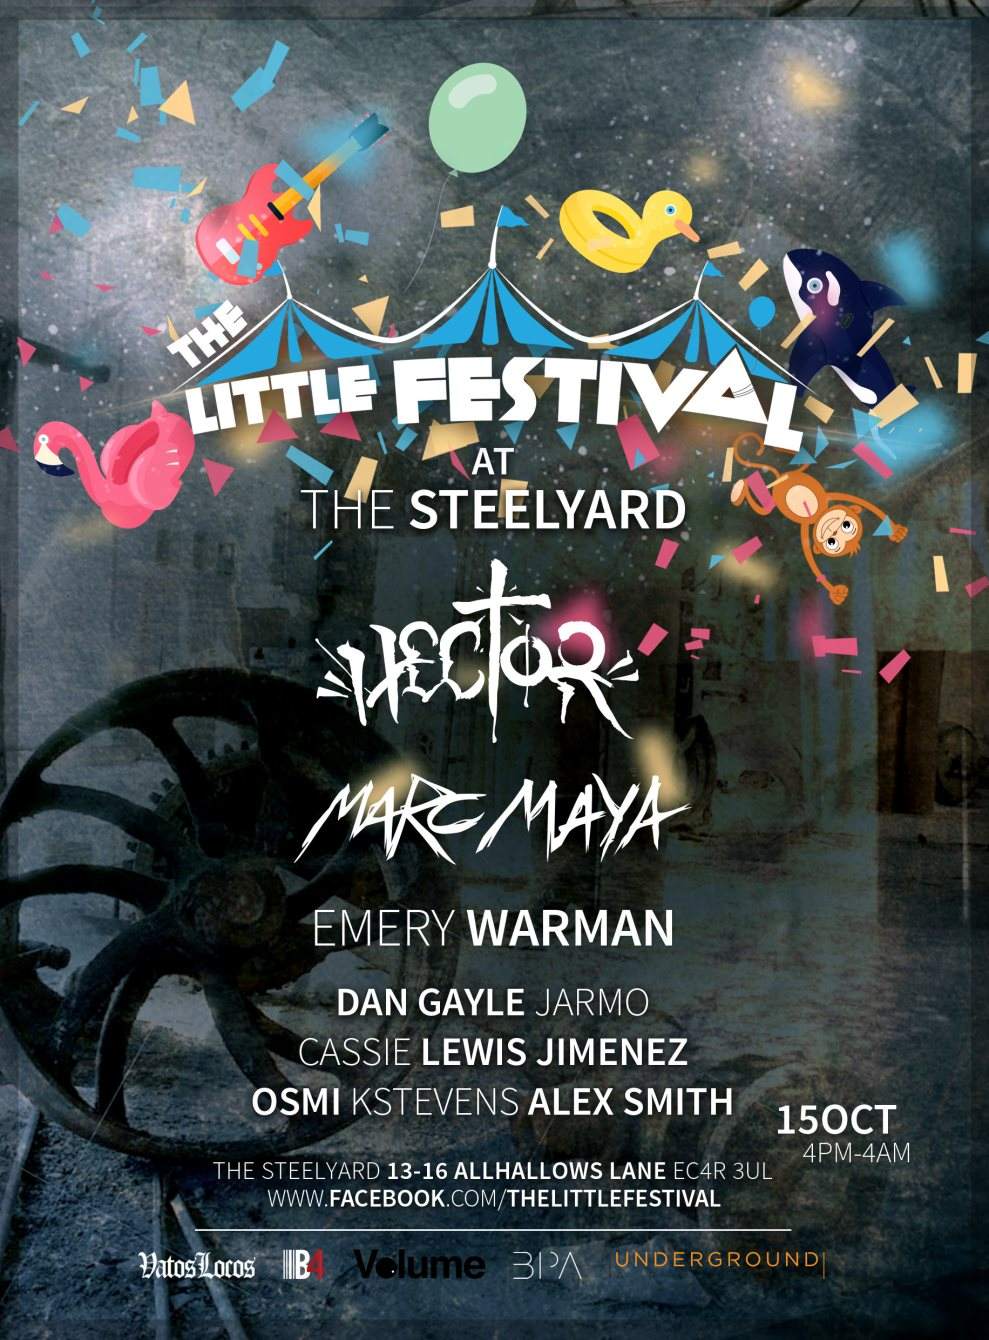 The Little Festival at The Steelyard - 12hr Day & Night Event - フライヤー表